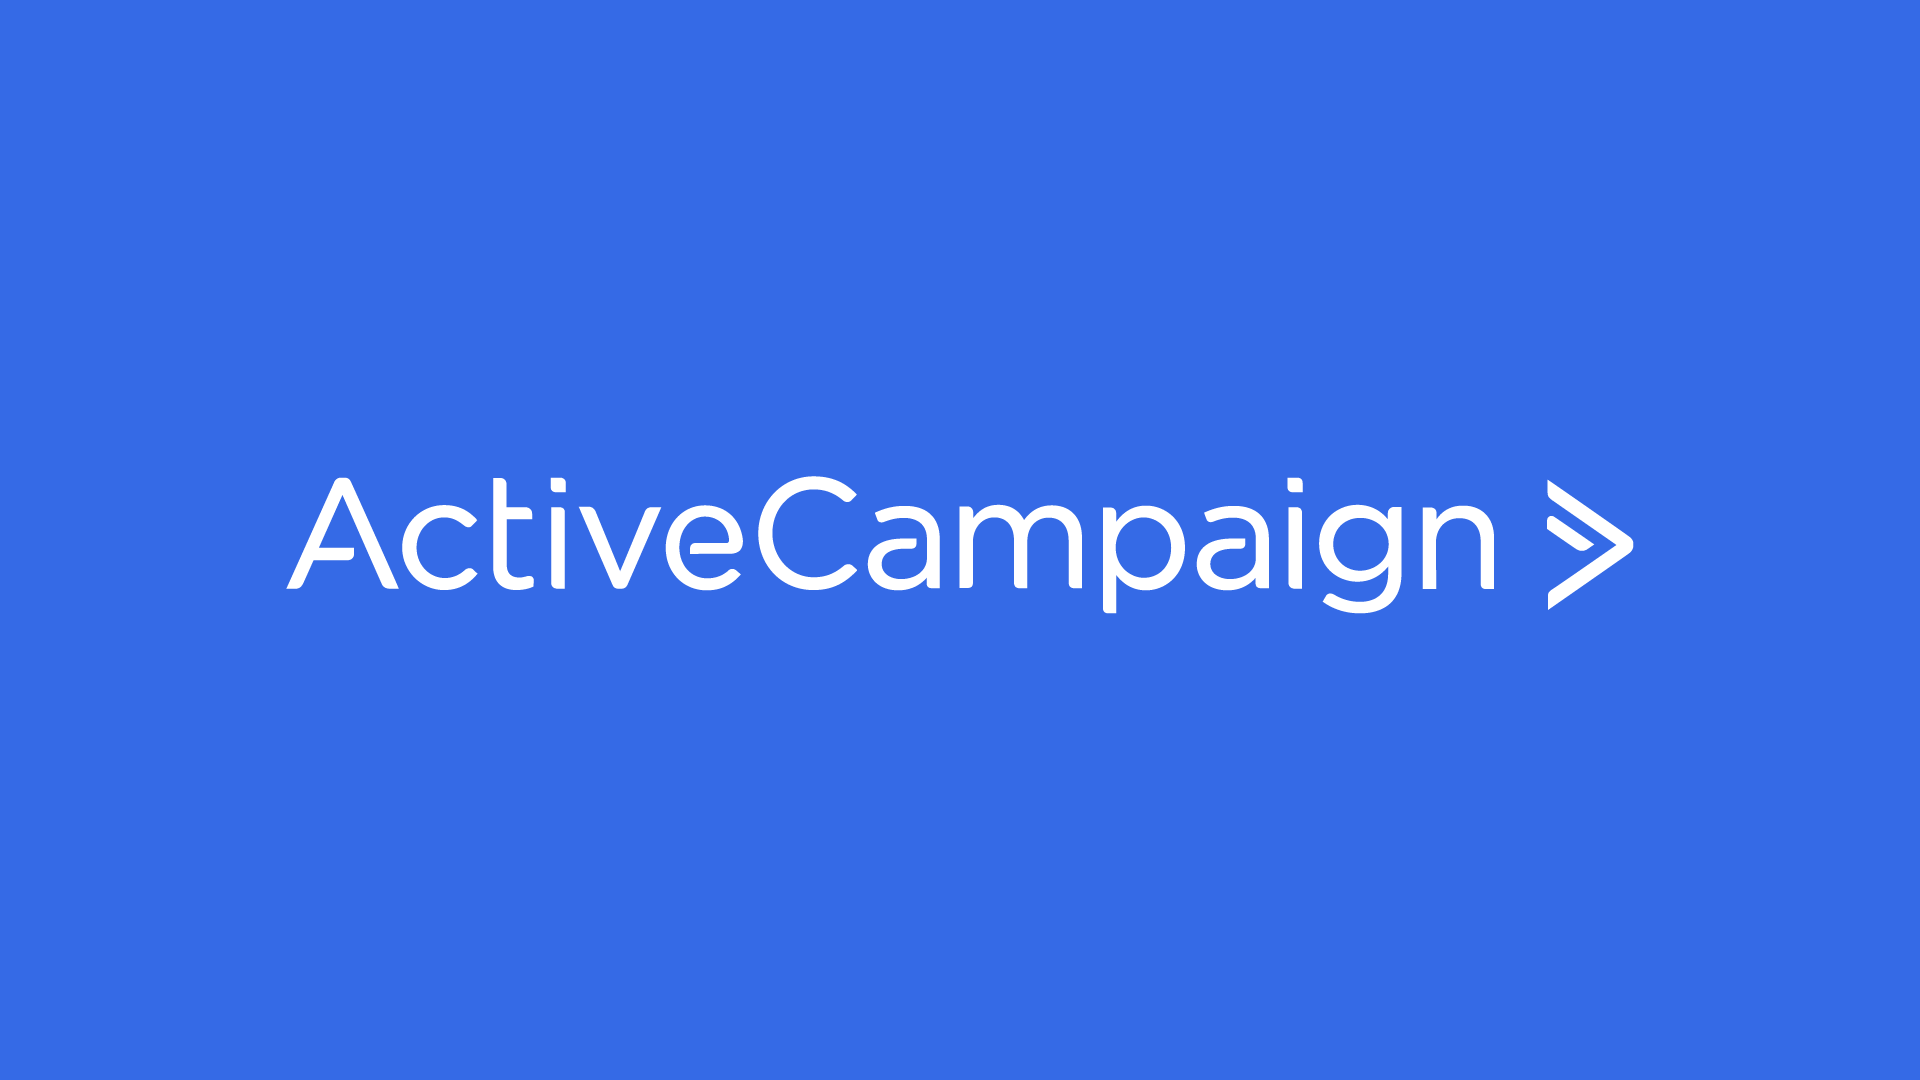 ActiveCampaign: the marketing automation champion for small businesses